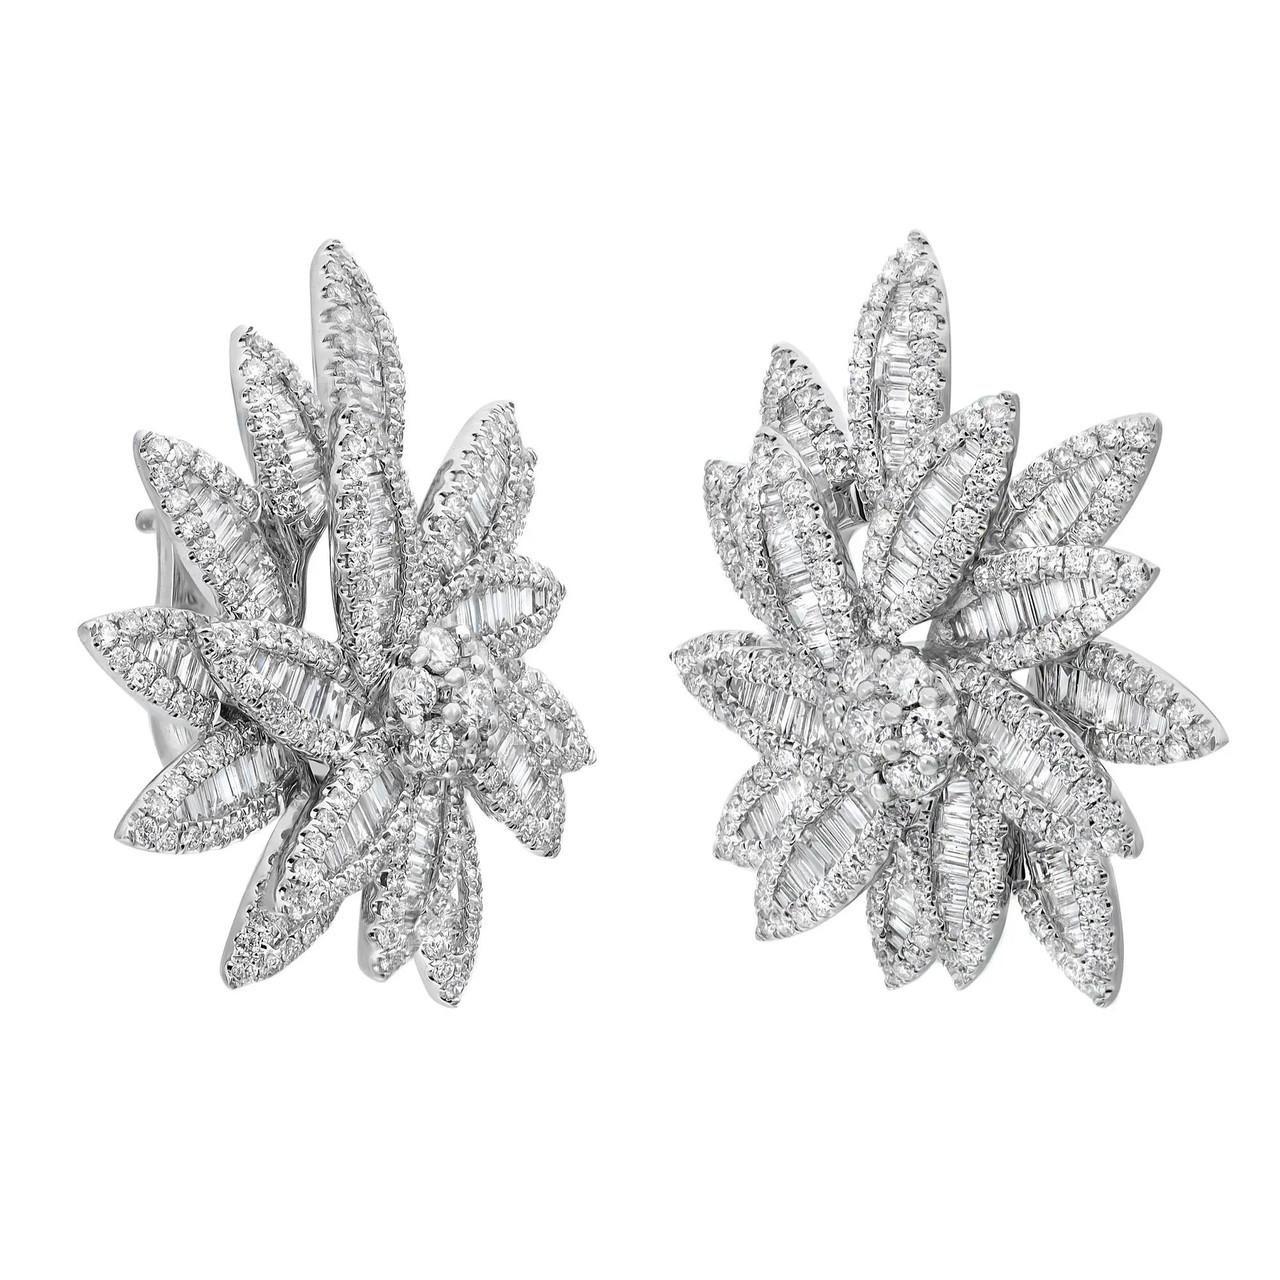 Elevate your look with these stunning diamond large stud earrings, designed to dazzle and delight. Expertly crafted from opulent 18K white gold, they boast a mesmerizing arrangement of channel set baguette cut diamonds, forming elegant flower petals